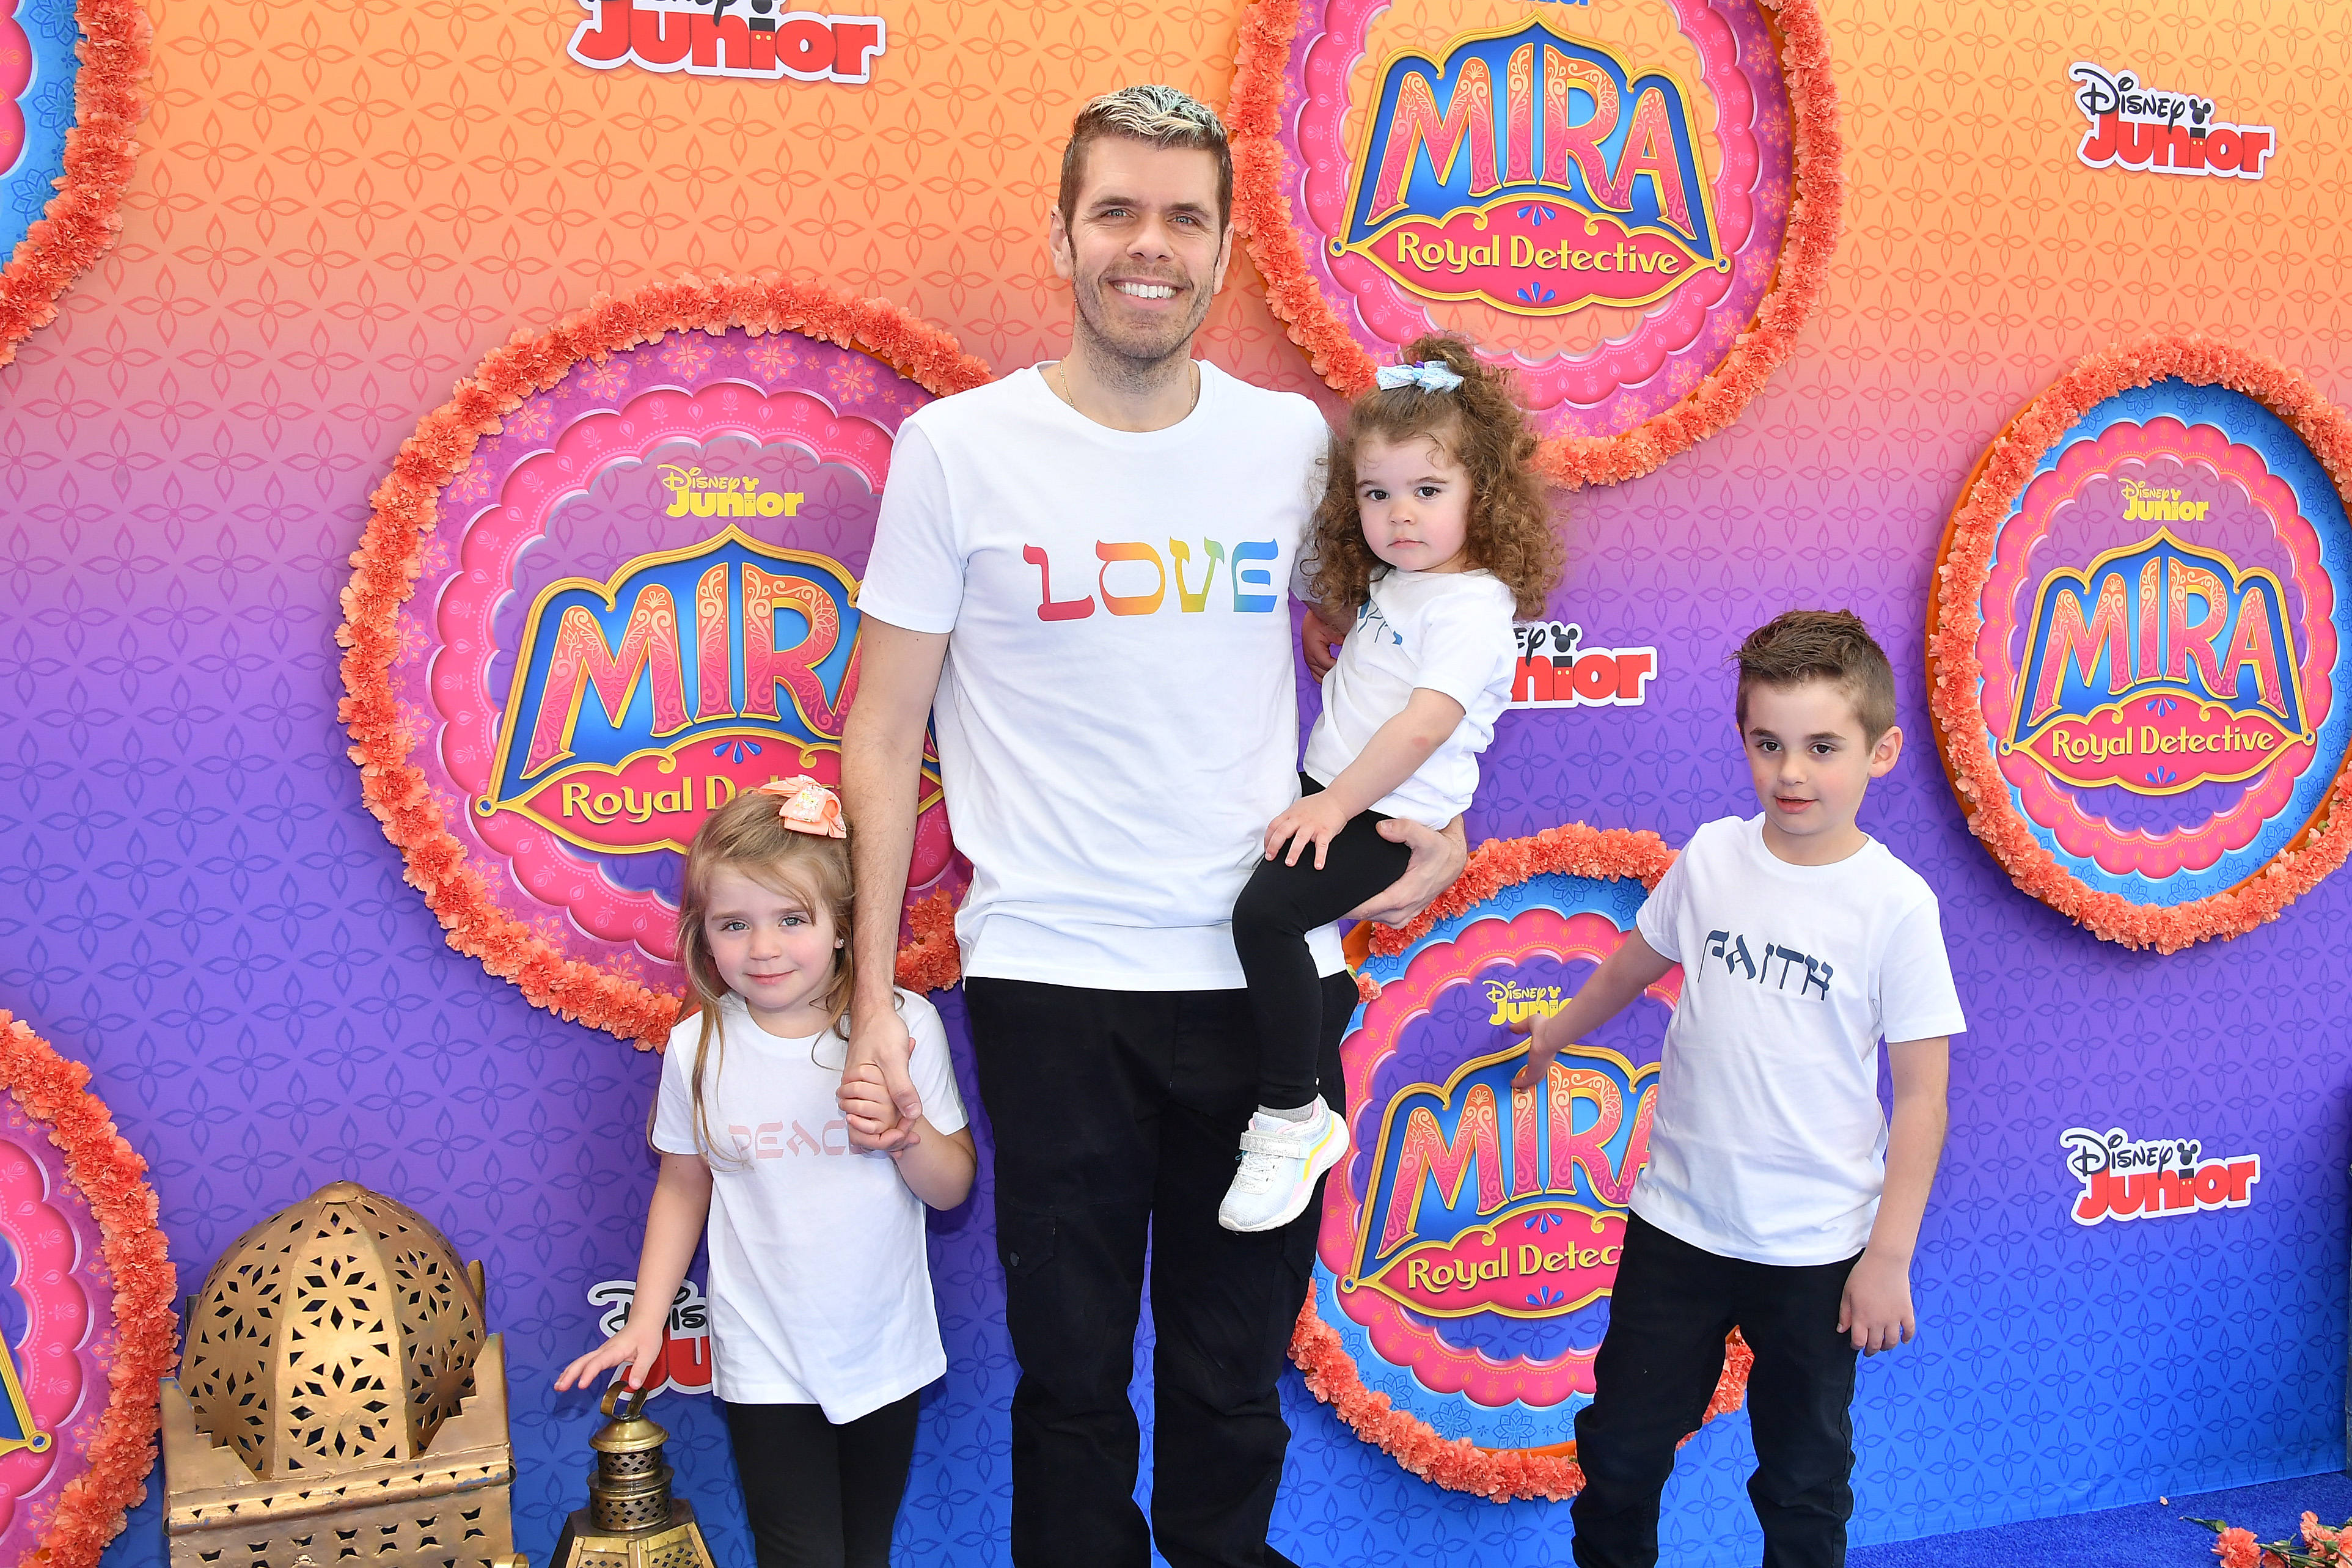 Perez Hilton and his children attend the premiere of Disney Junior's "Mira, Royal Detective" at Walt Disney Studios Main Theater on March 07, 2020 in Burbank, California. | Source: Getty Images